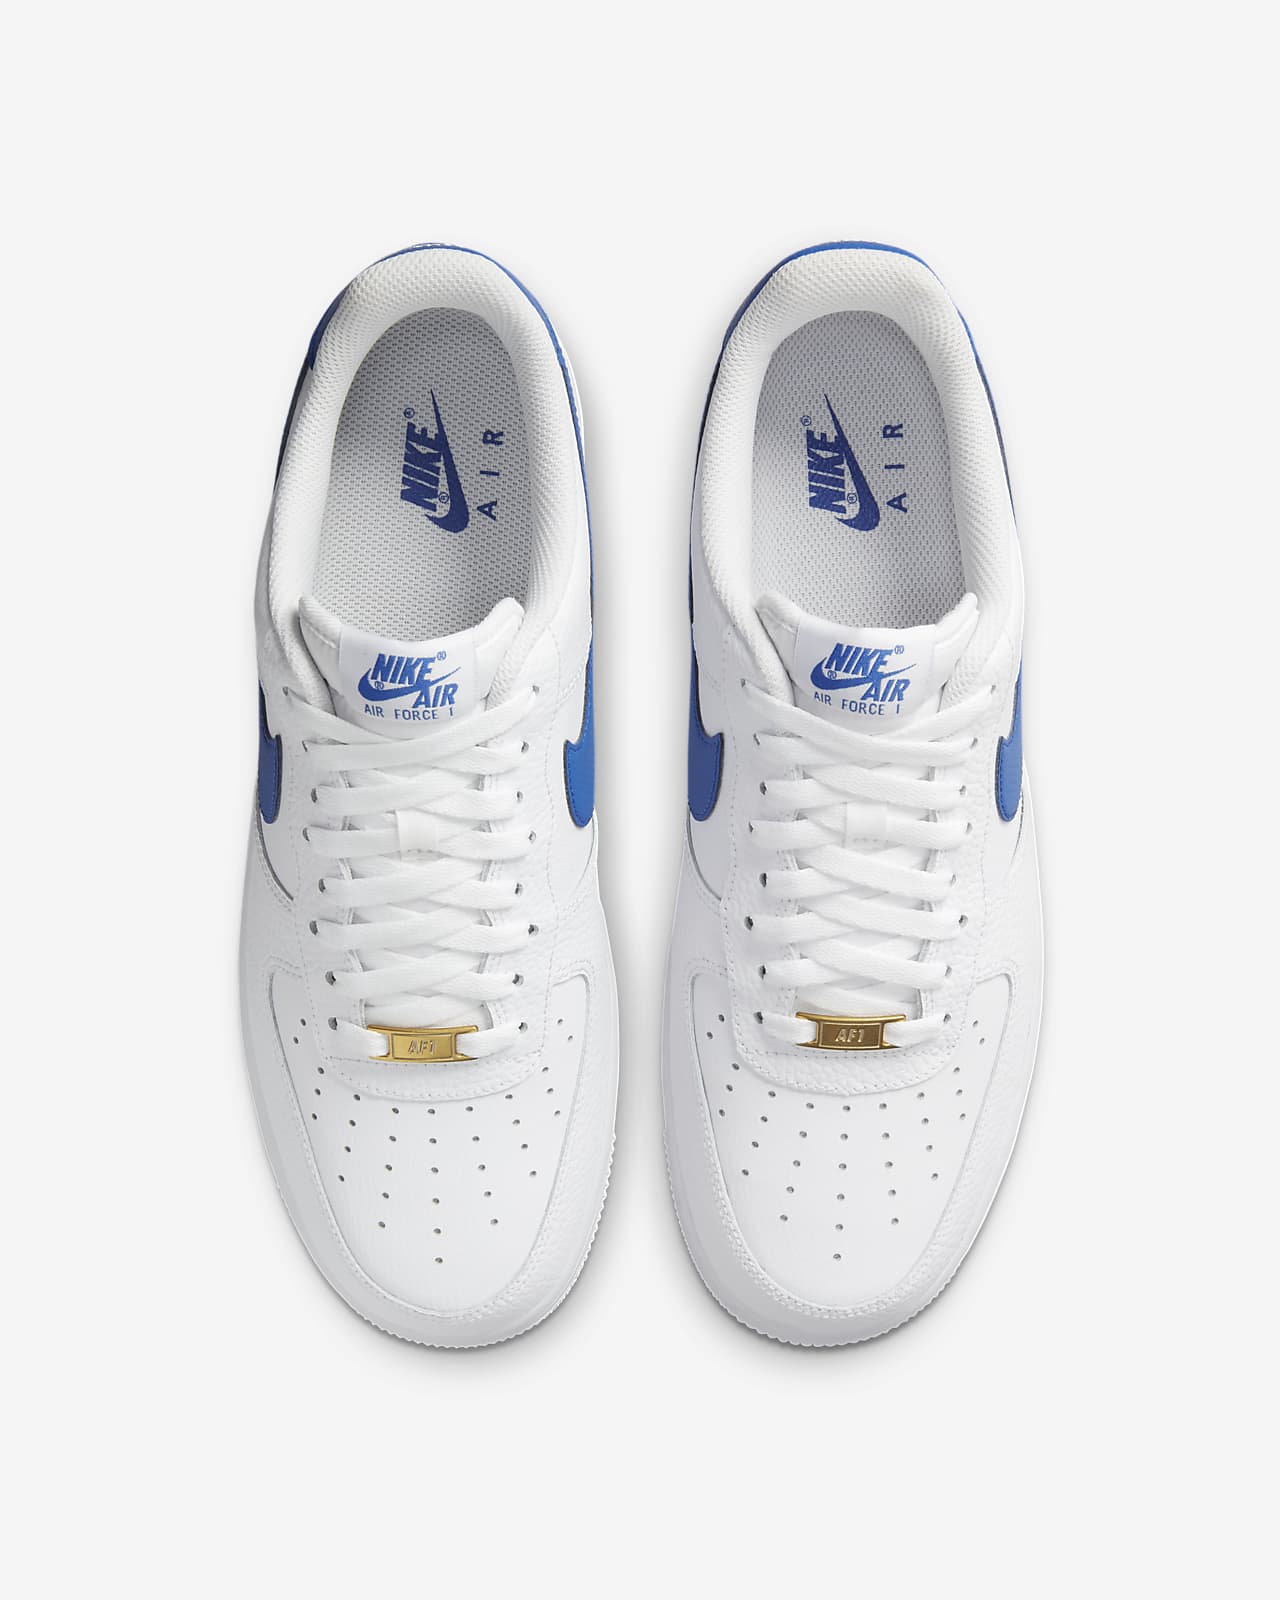 Nike Air Force 1 '07 Shoes White Game Royal Blue DM2845-100 Mens Multi  Sizes NEW